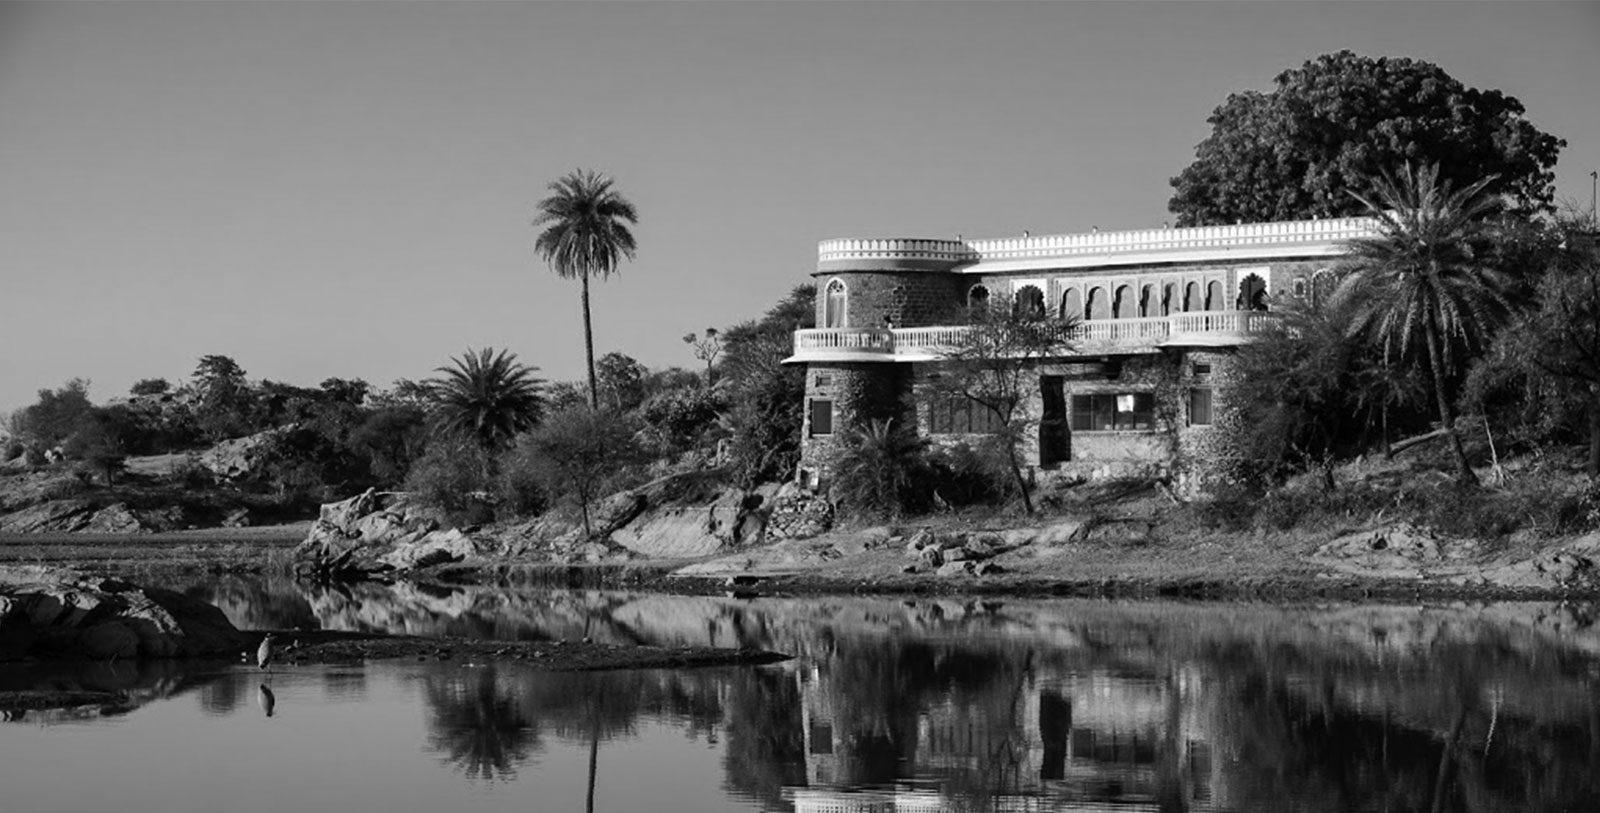 Discover Fort Seengh Sagar, located in a seasonal lake near the historic ruins of the deserted Manpura village.